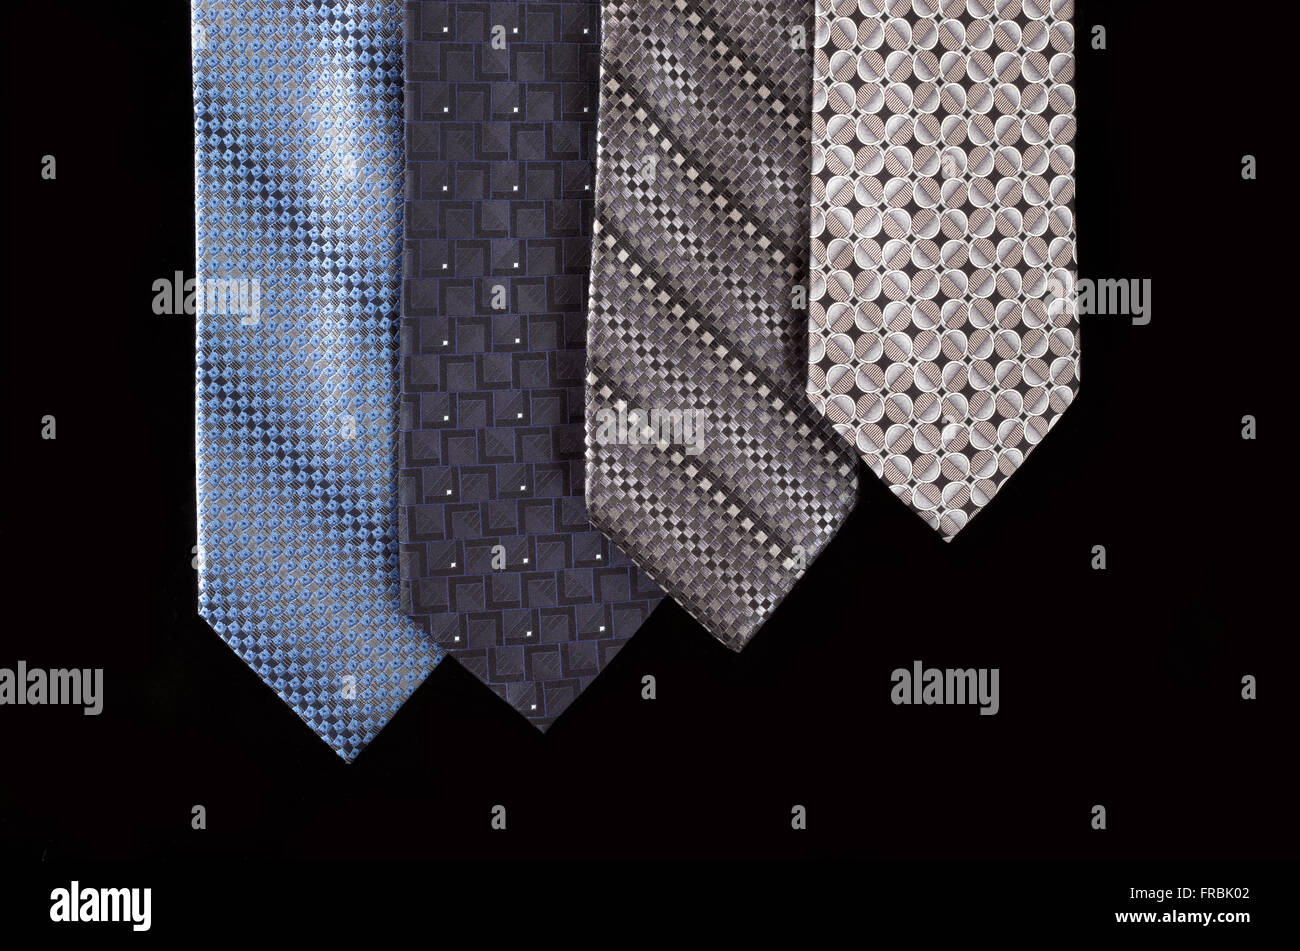 four neckties hanging vertically and isolated against black background Stock Photo